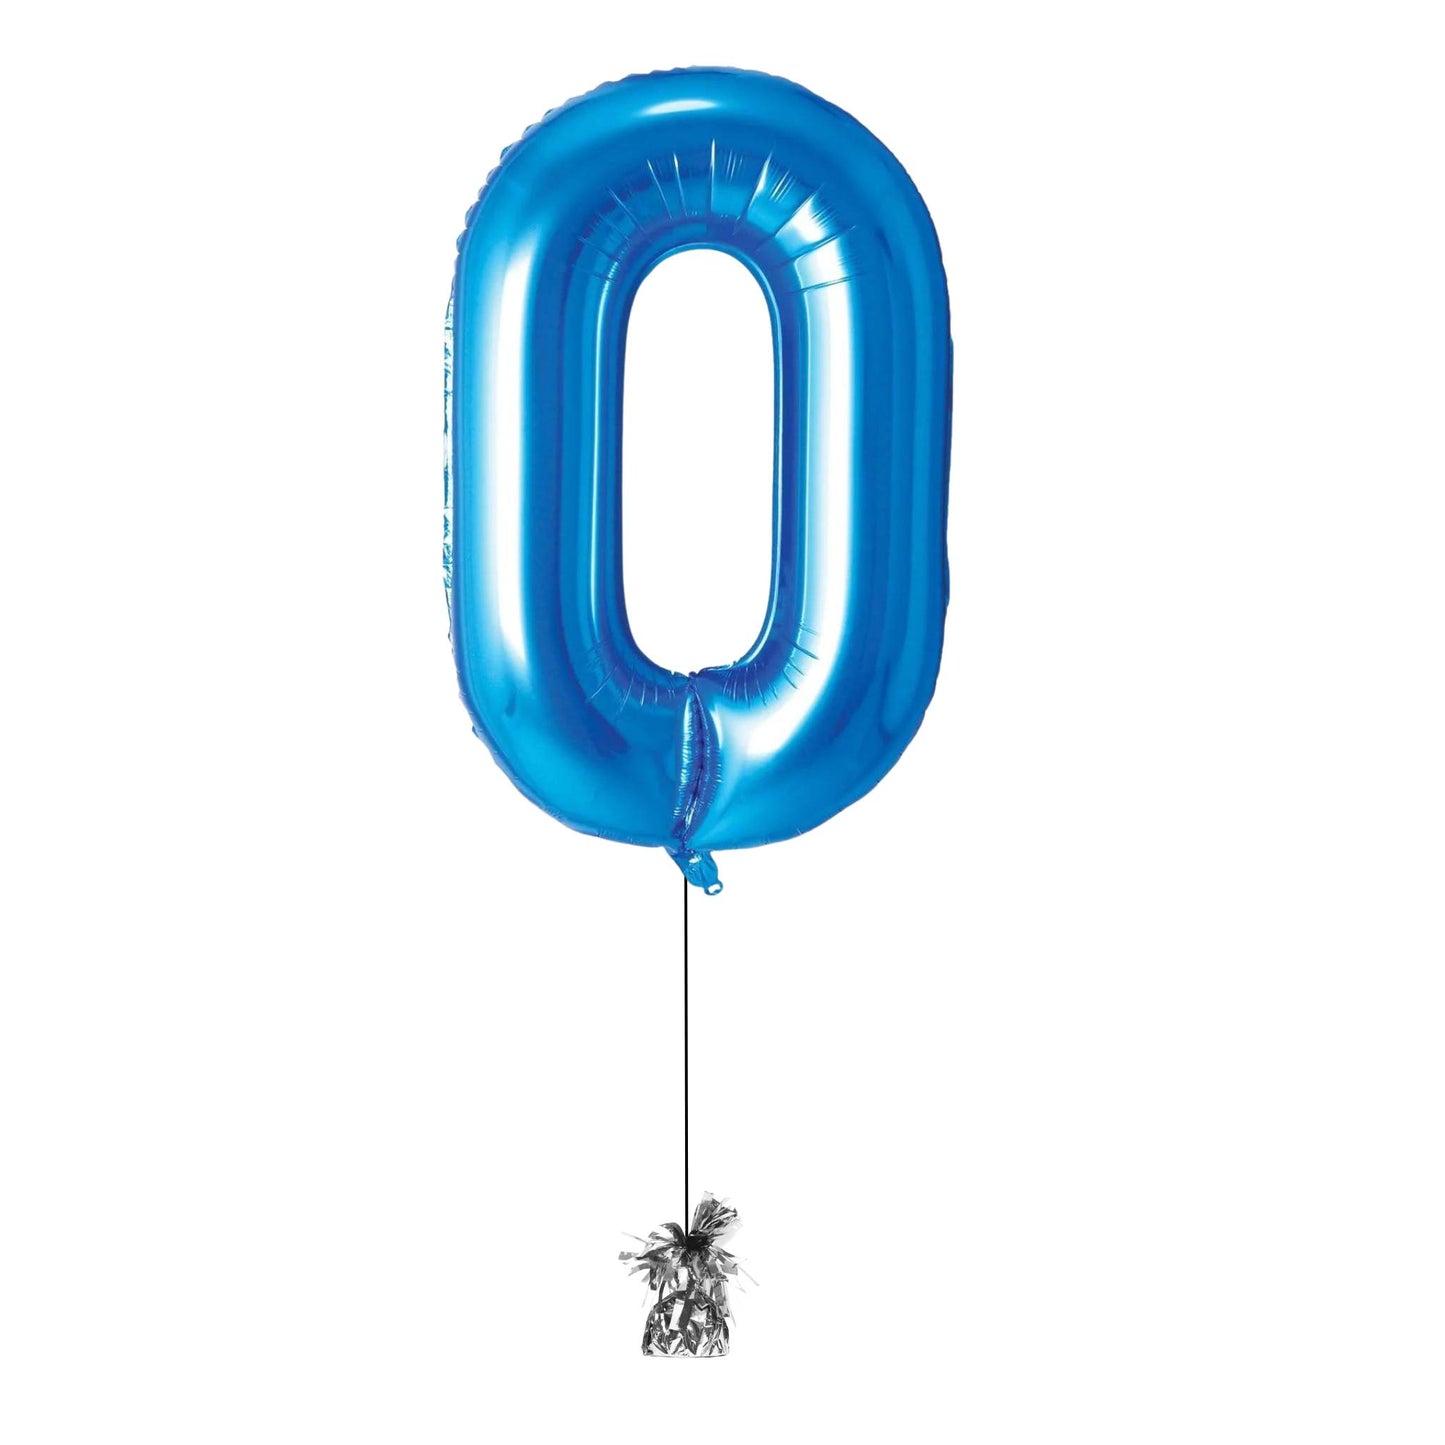 34 inch Blue Balloon Number 0 Helium filled